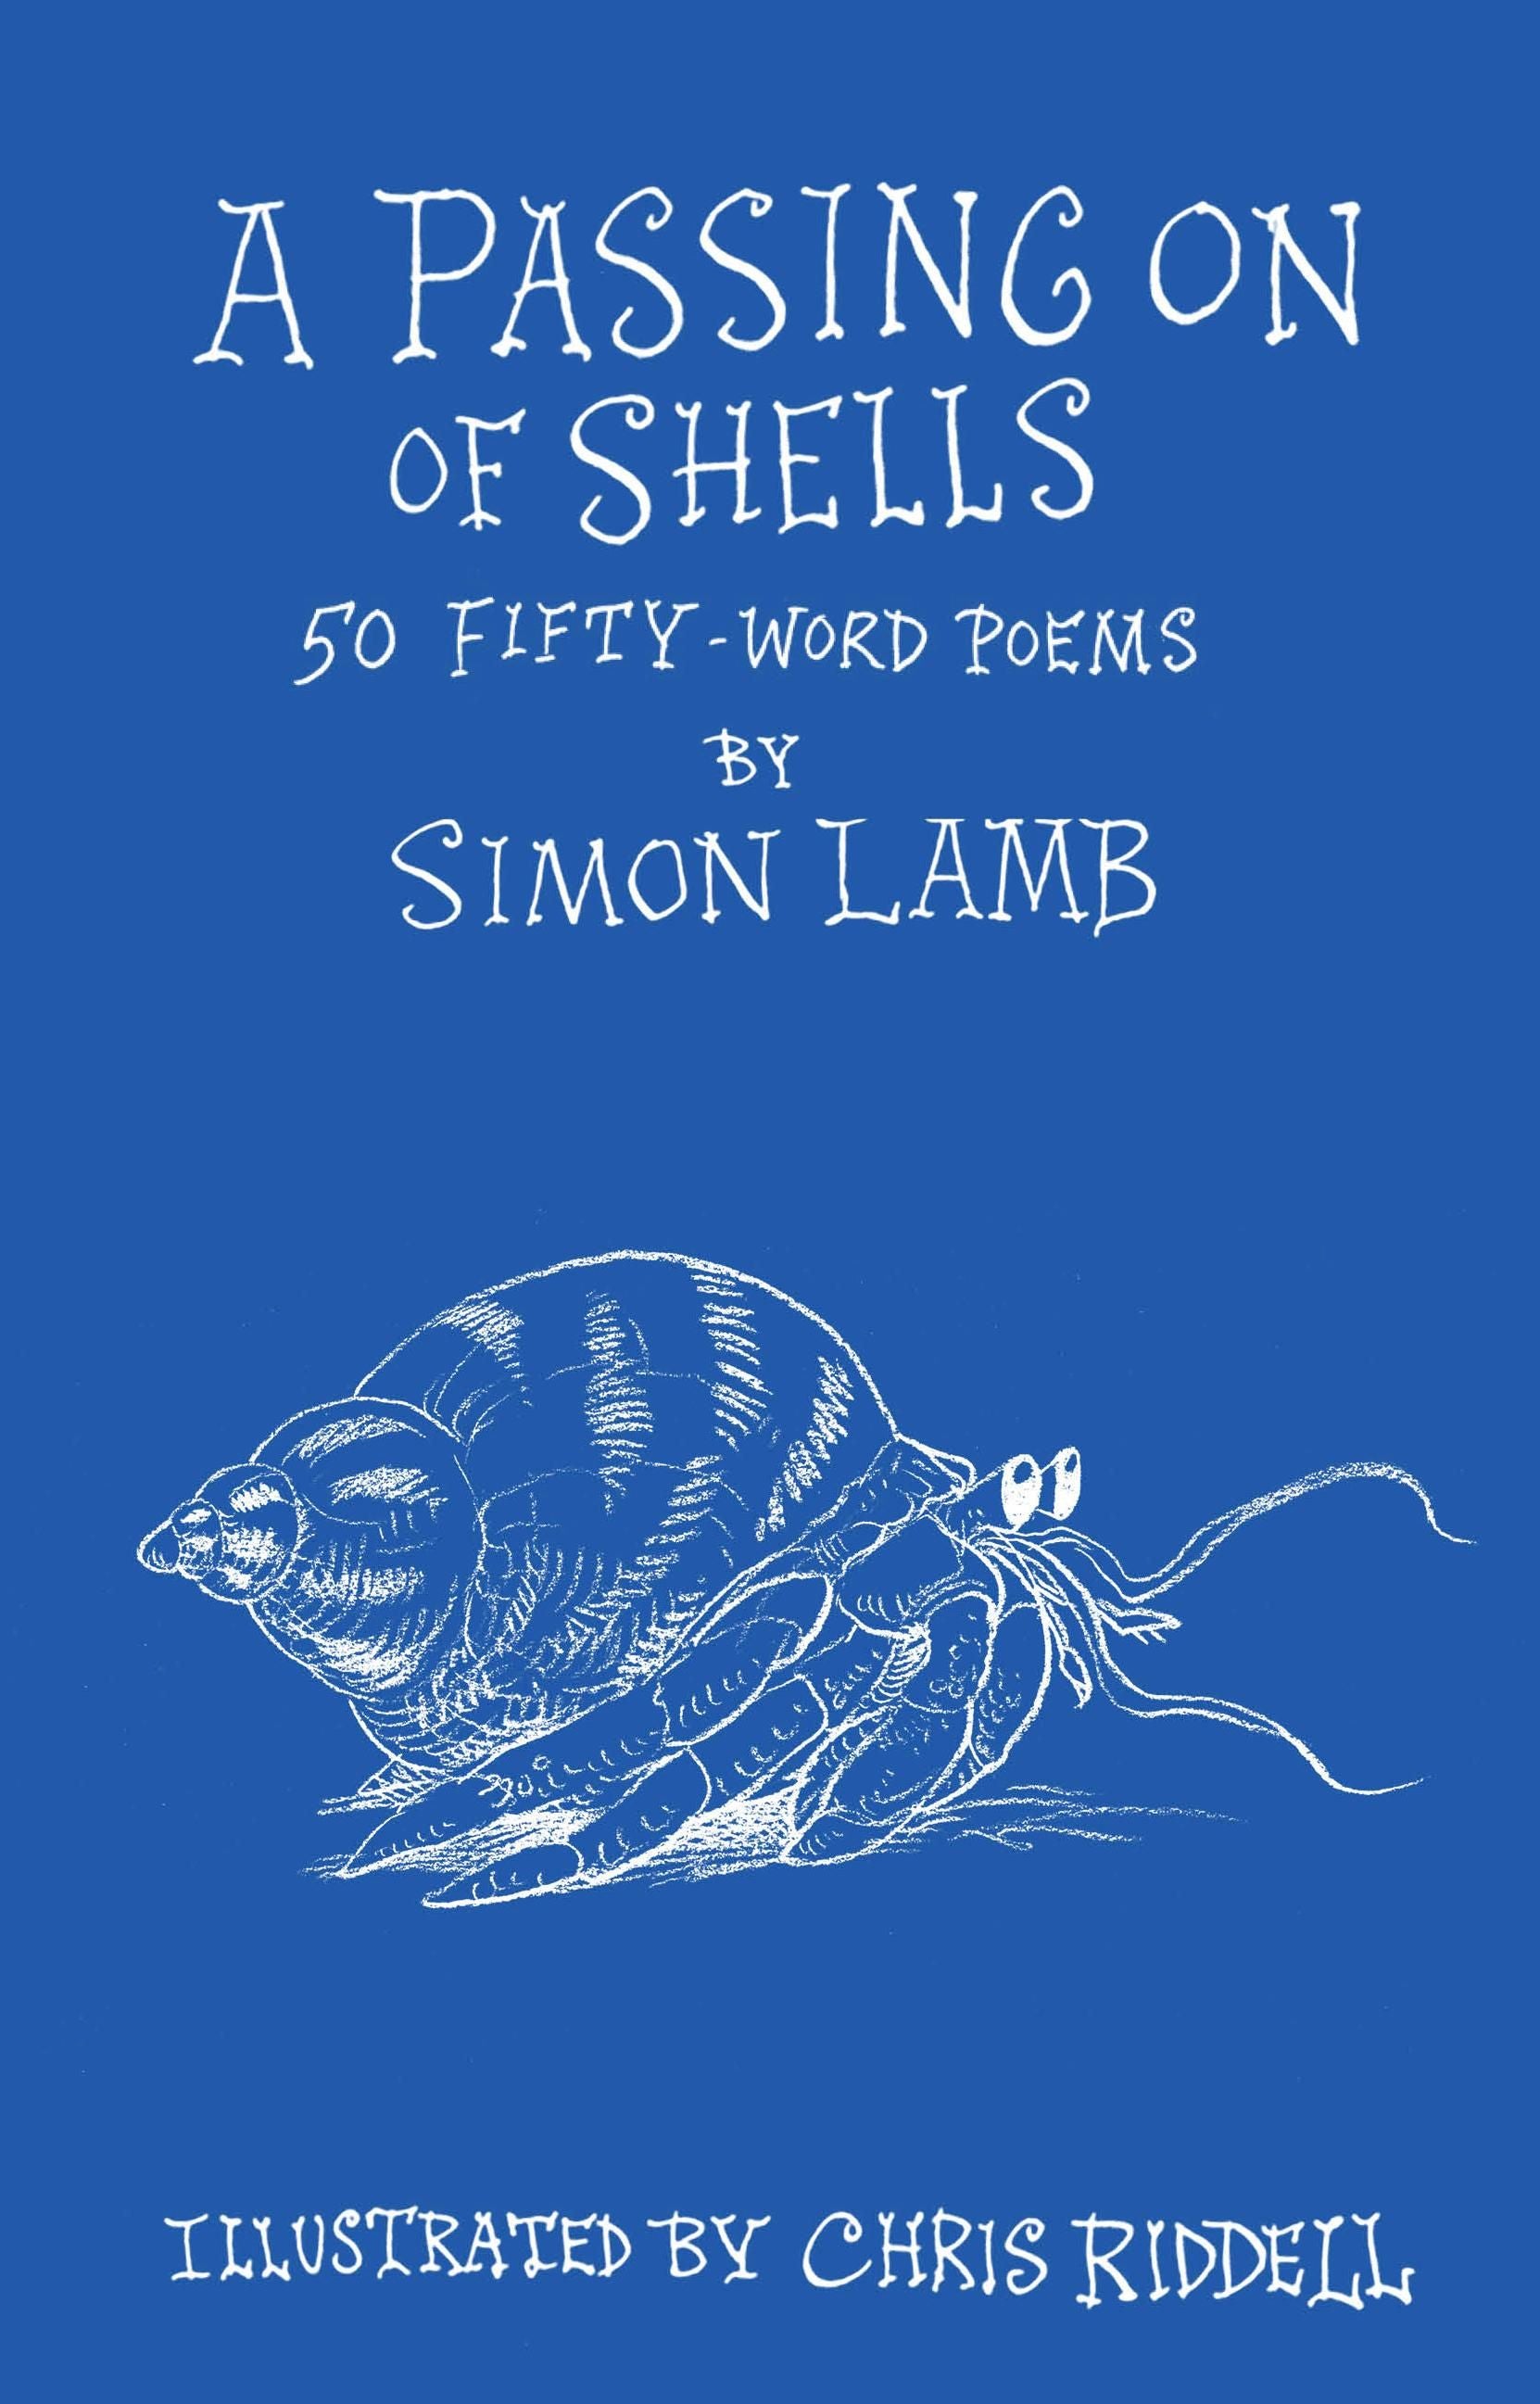 A Passing On of Shells: 50 Fifty-Word Poems by Simon Lamb